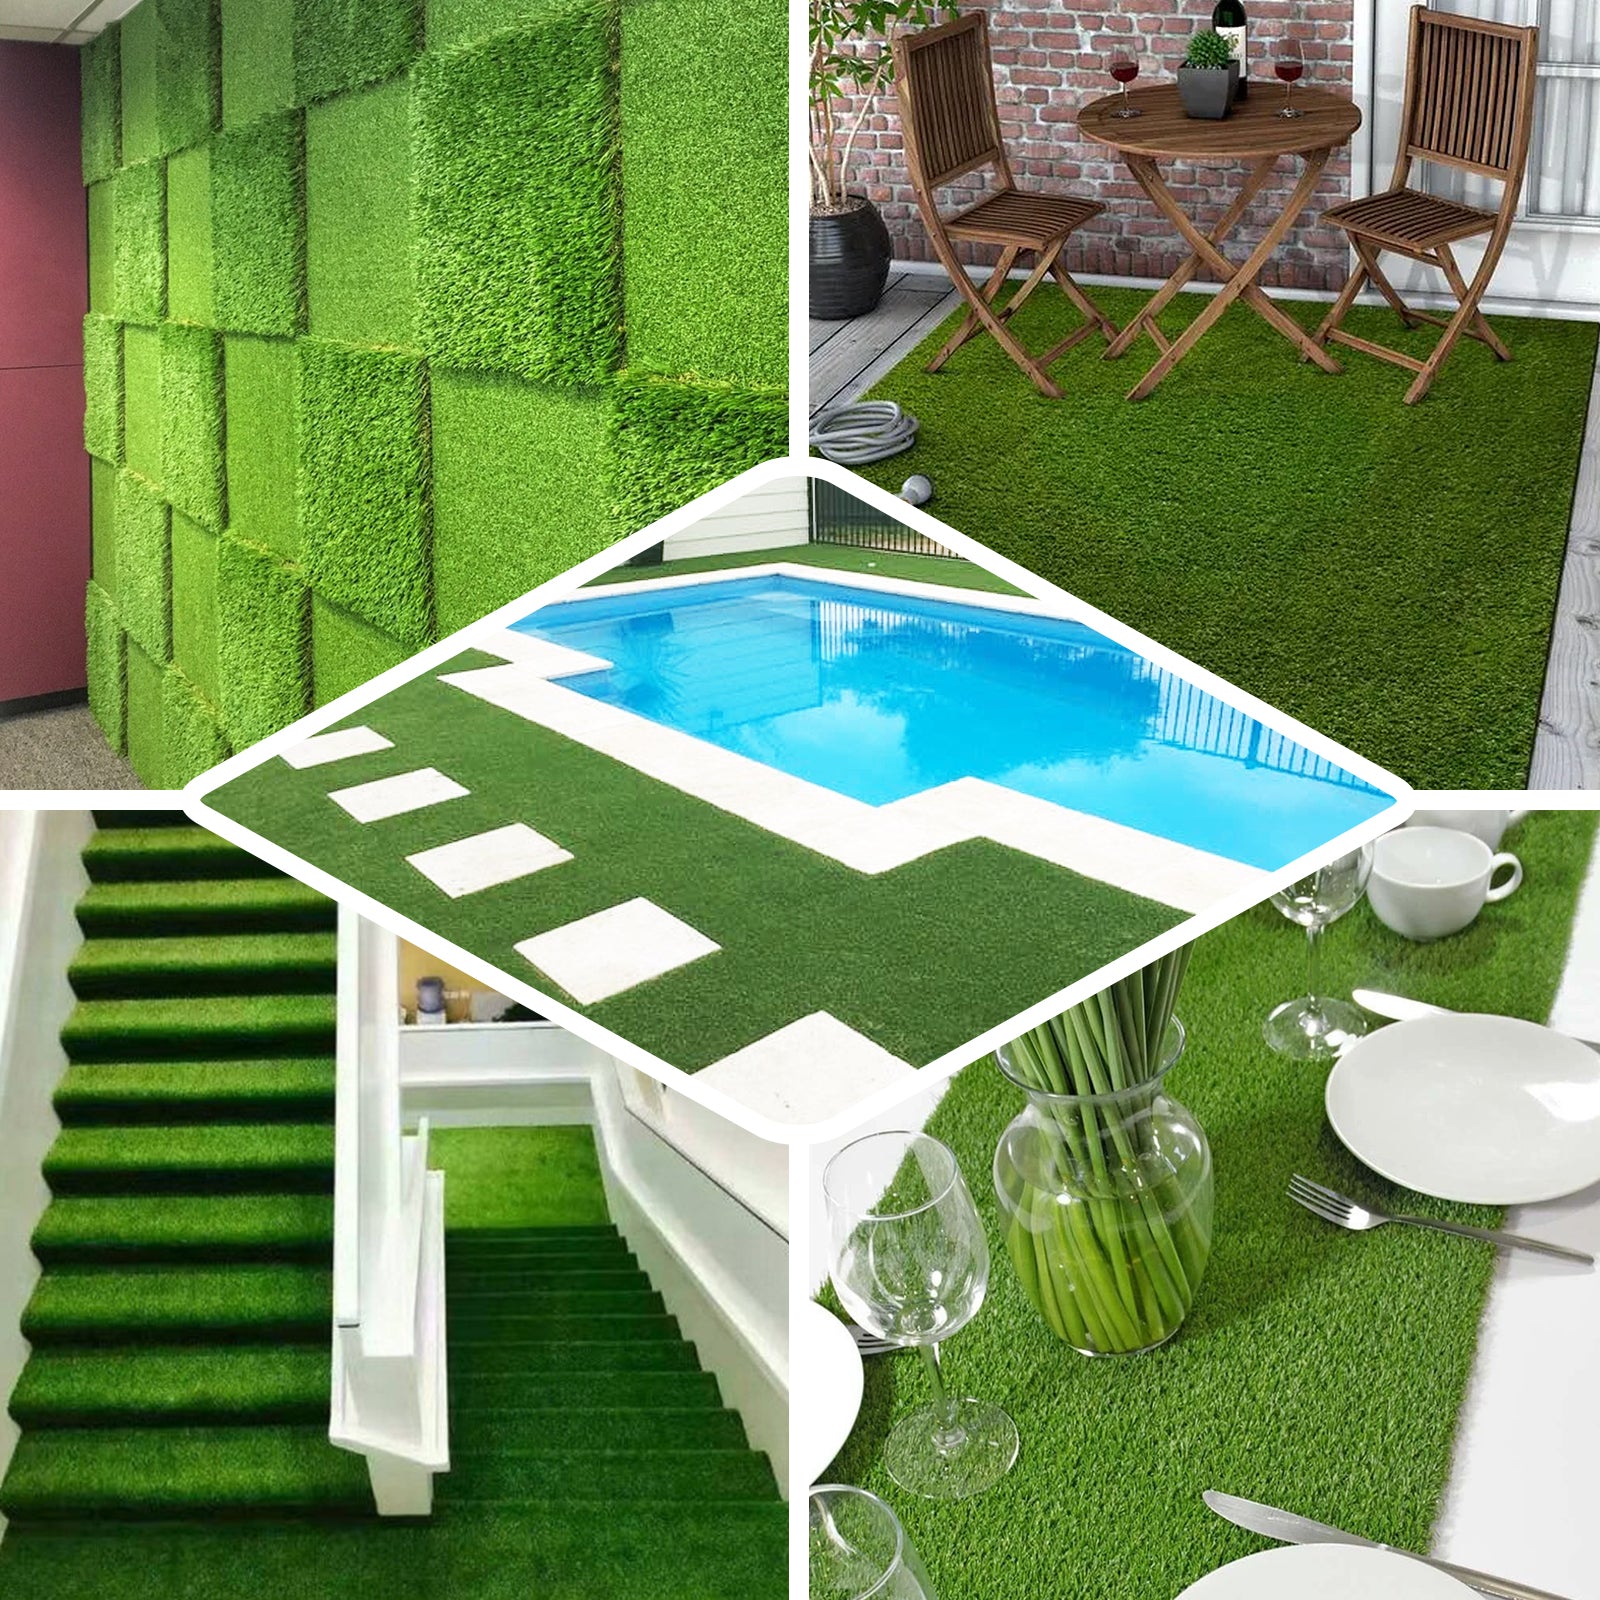 get-the-official-green-all-weather-artificial-grass-table-runner-9ft-discount_4.jpg